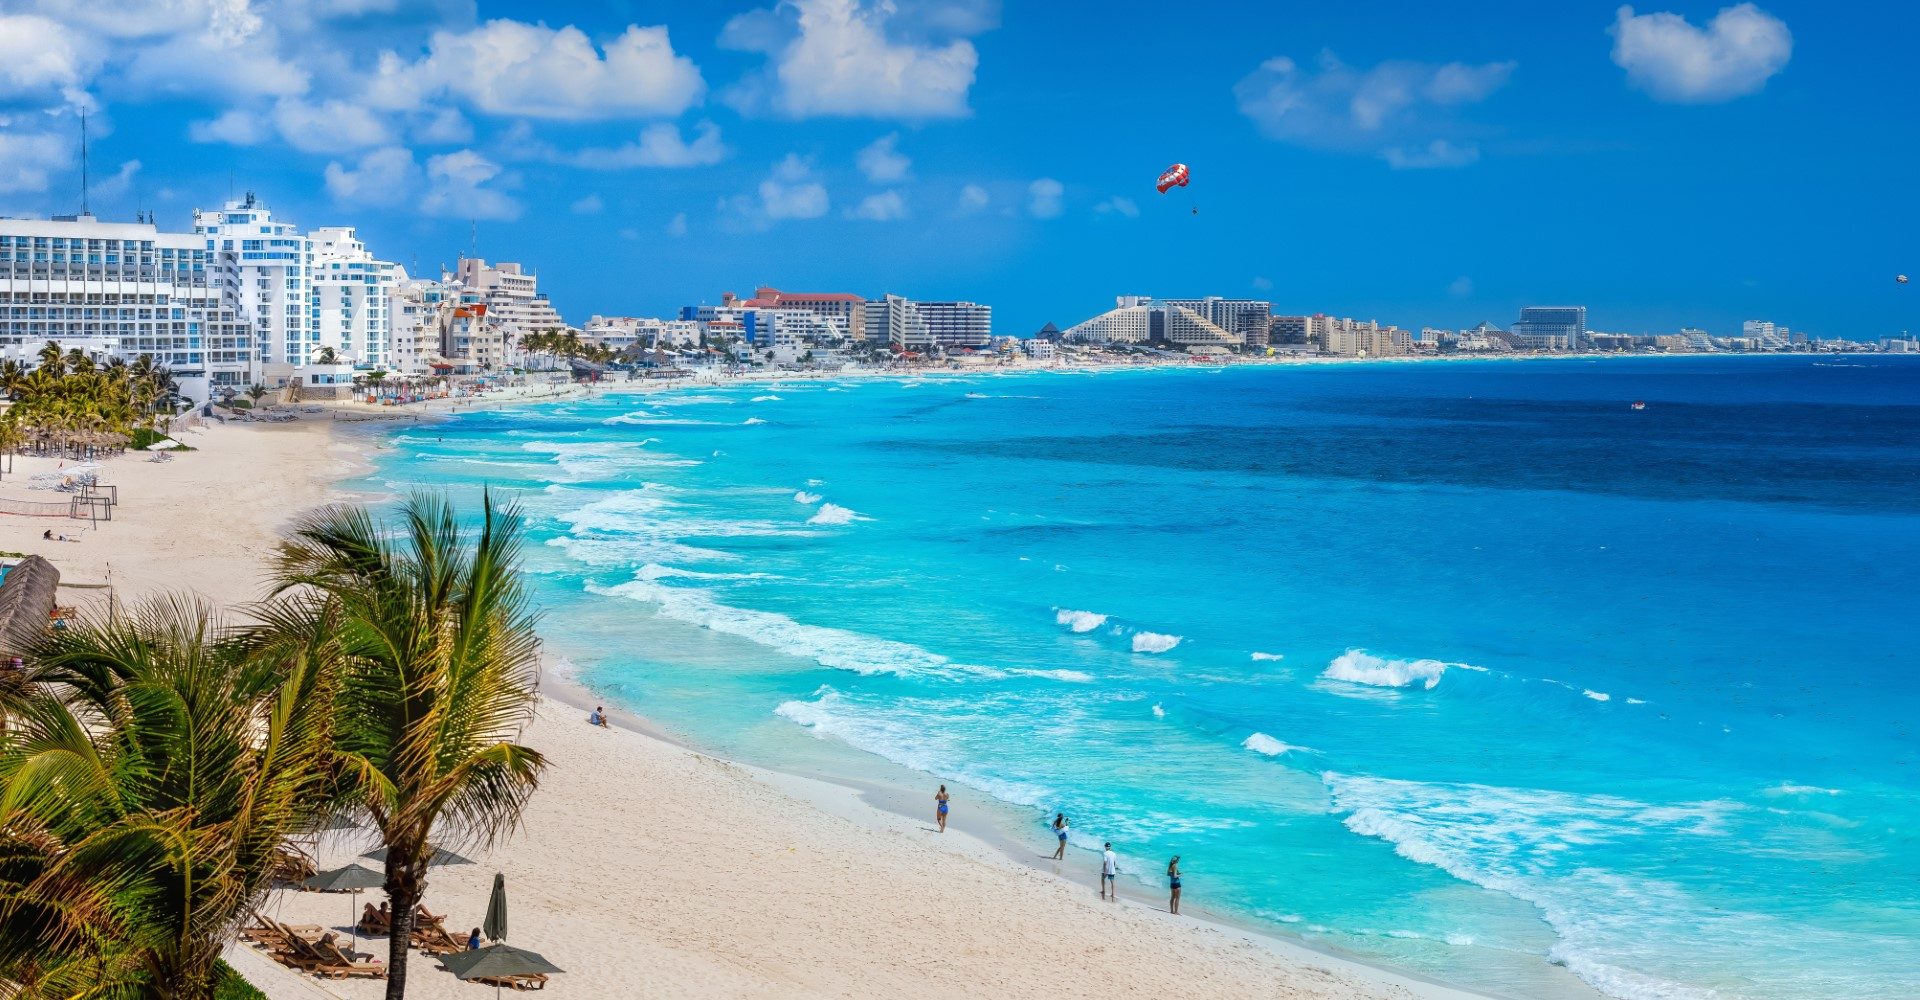  International tourism in Mexico plummeted by almost 50% in January